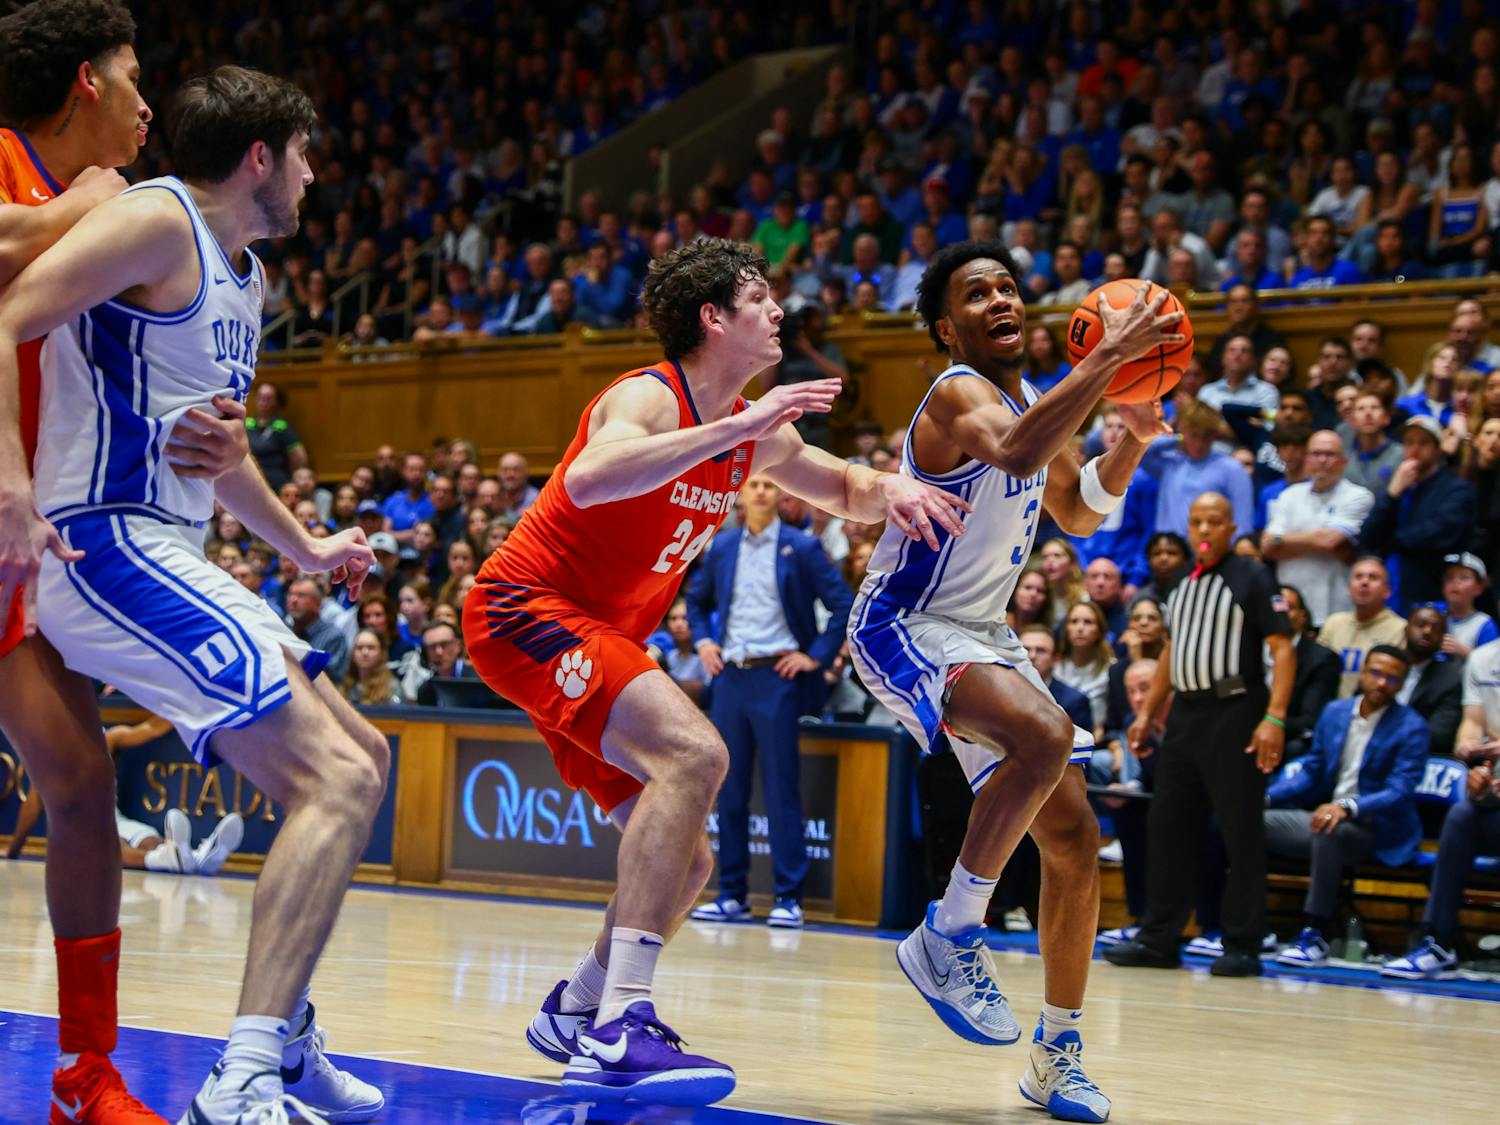 Senior guard Jeremy Roach drives to the basket in Duke's game against Clemson.